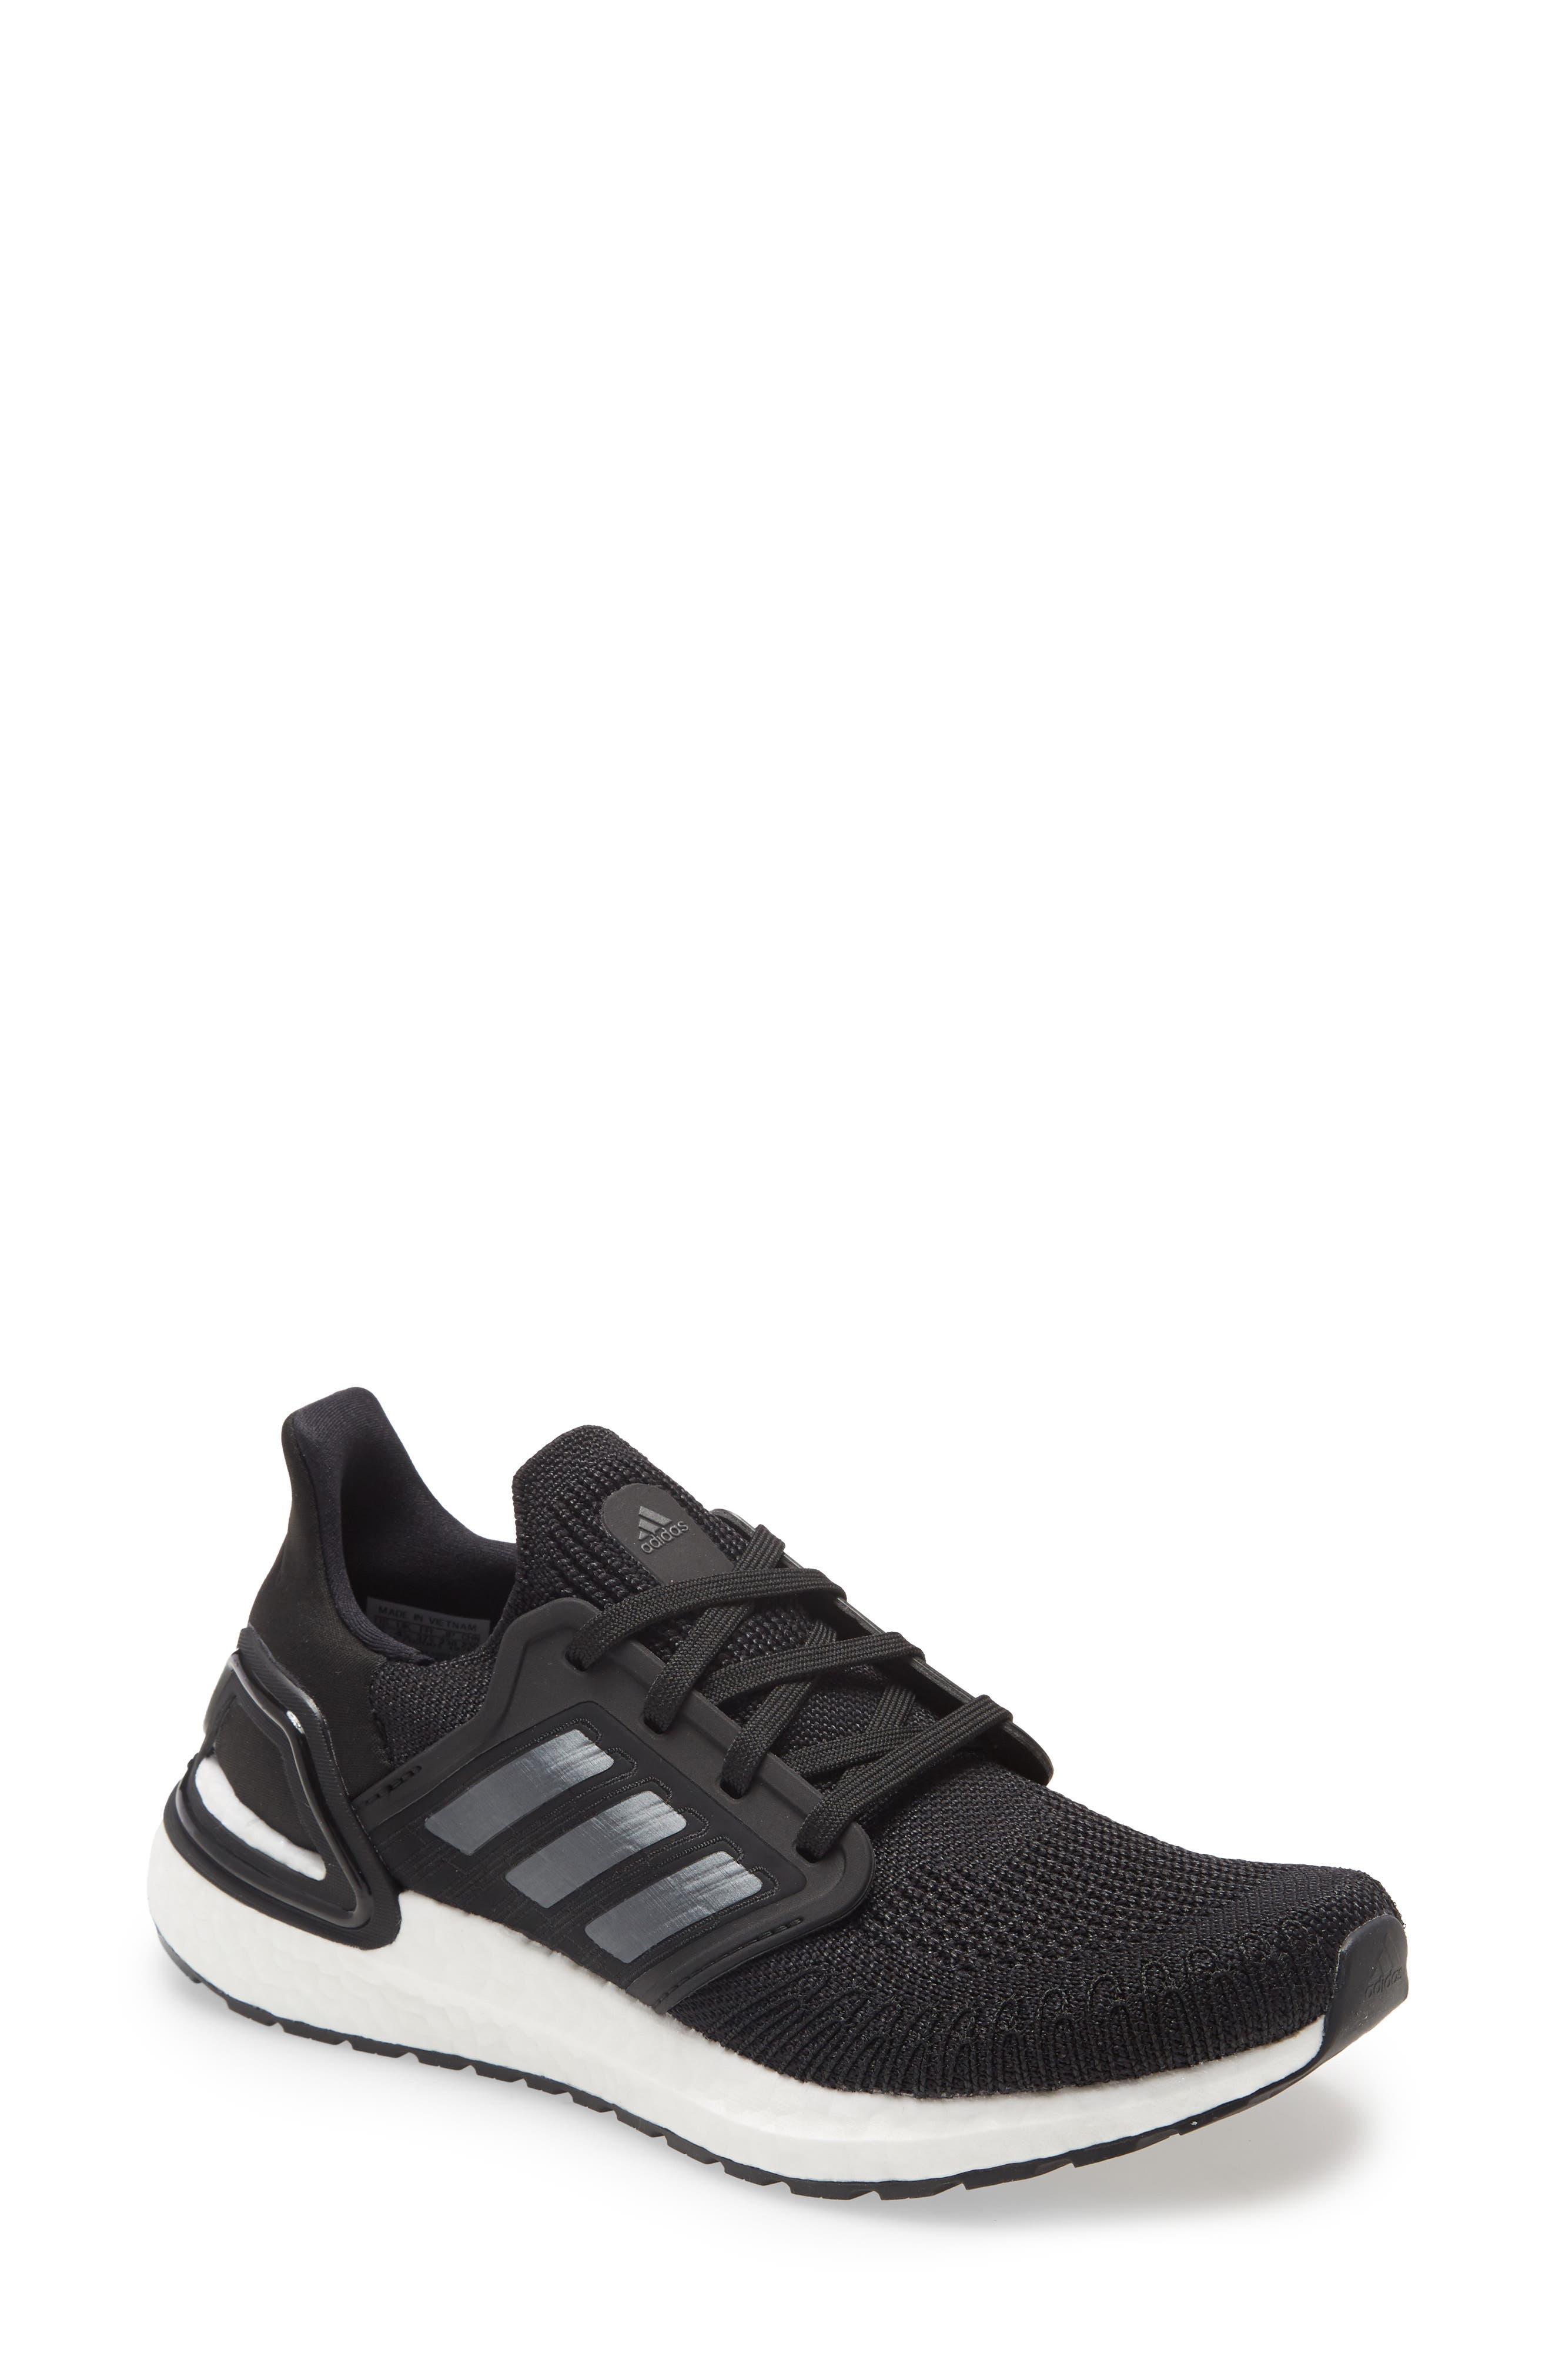 sports direct sale womens shoes